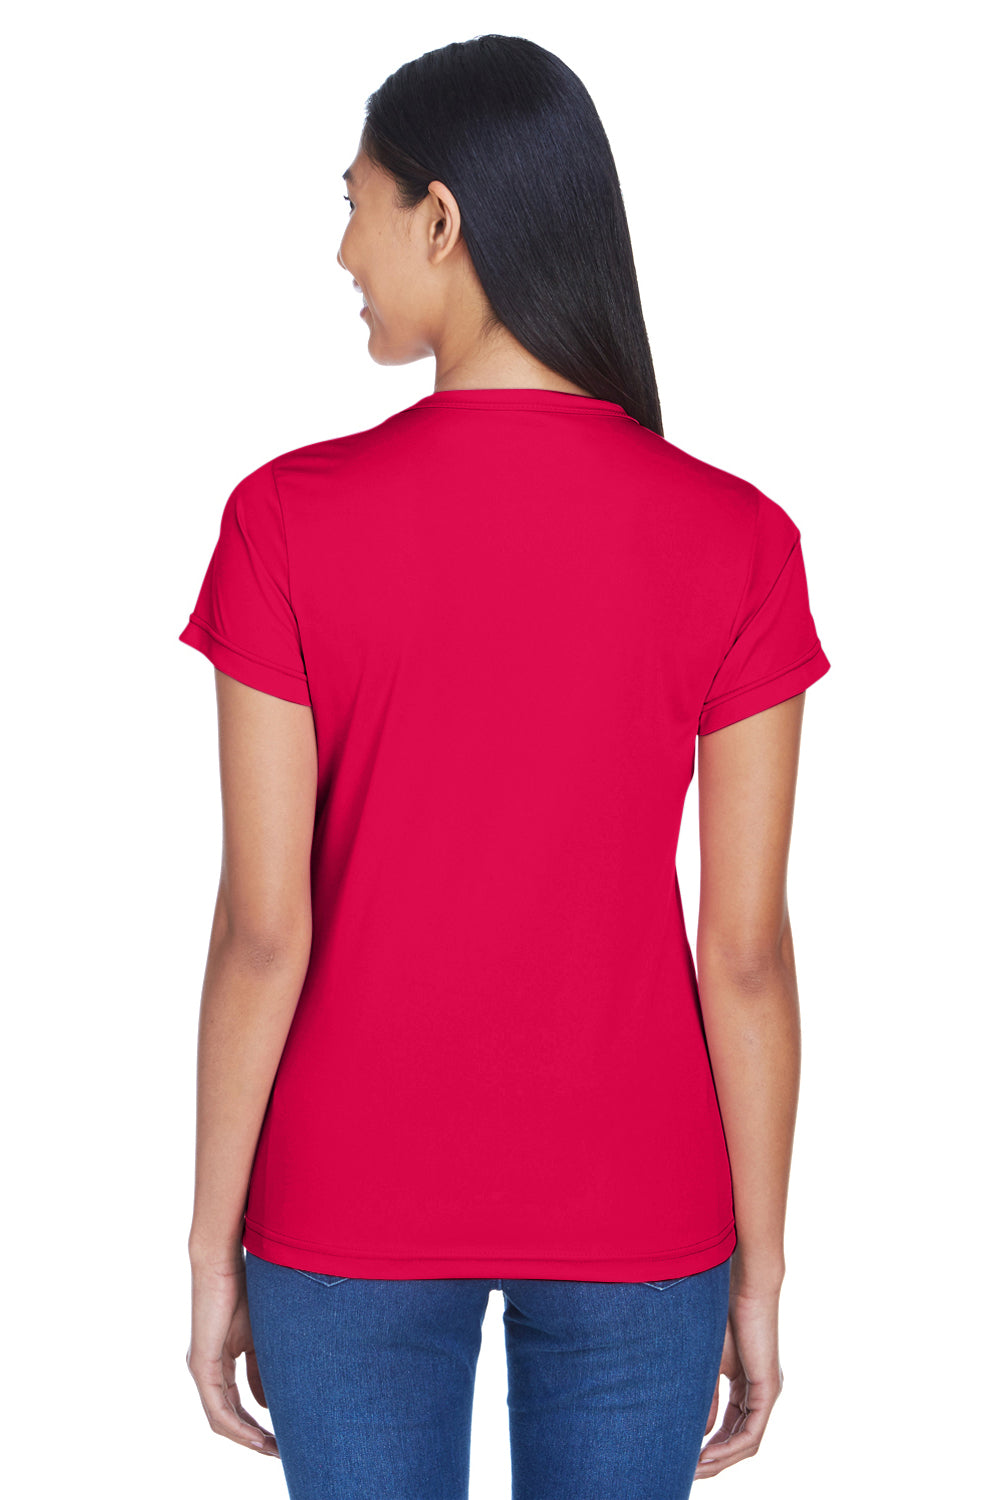 UltraClub 8420L Womens Cool & Dry Performance Moisture Wicking Short Sleeve Crewneck T-Shirt Red Back